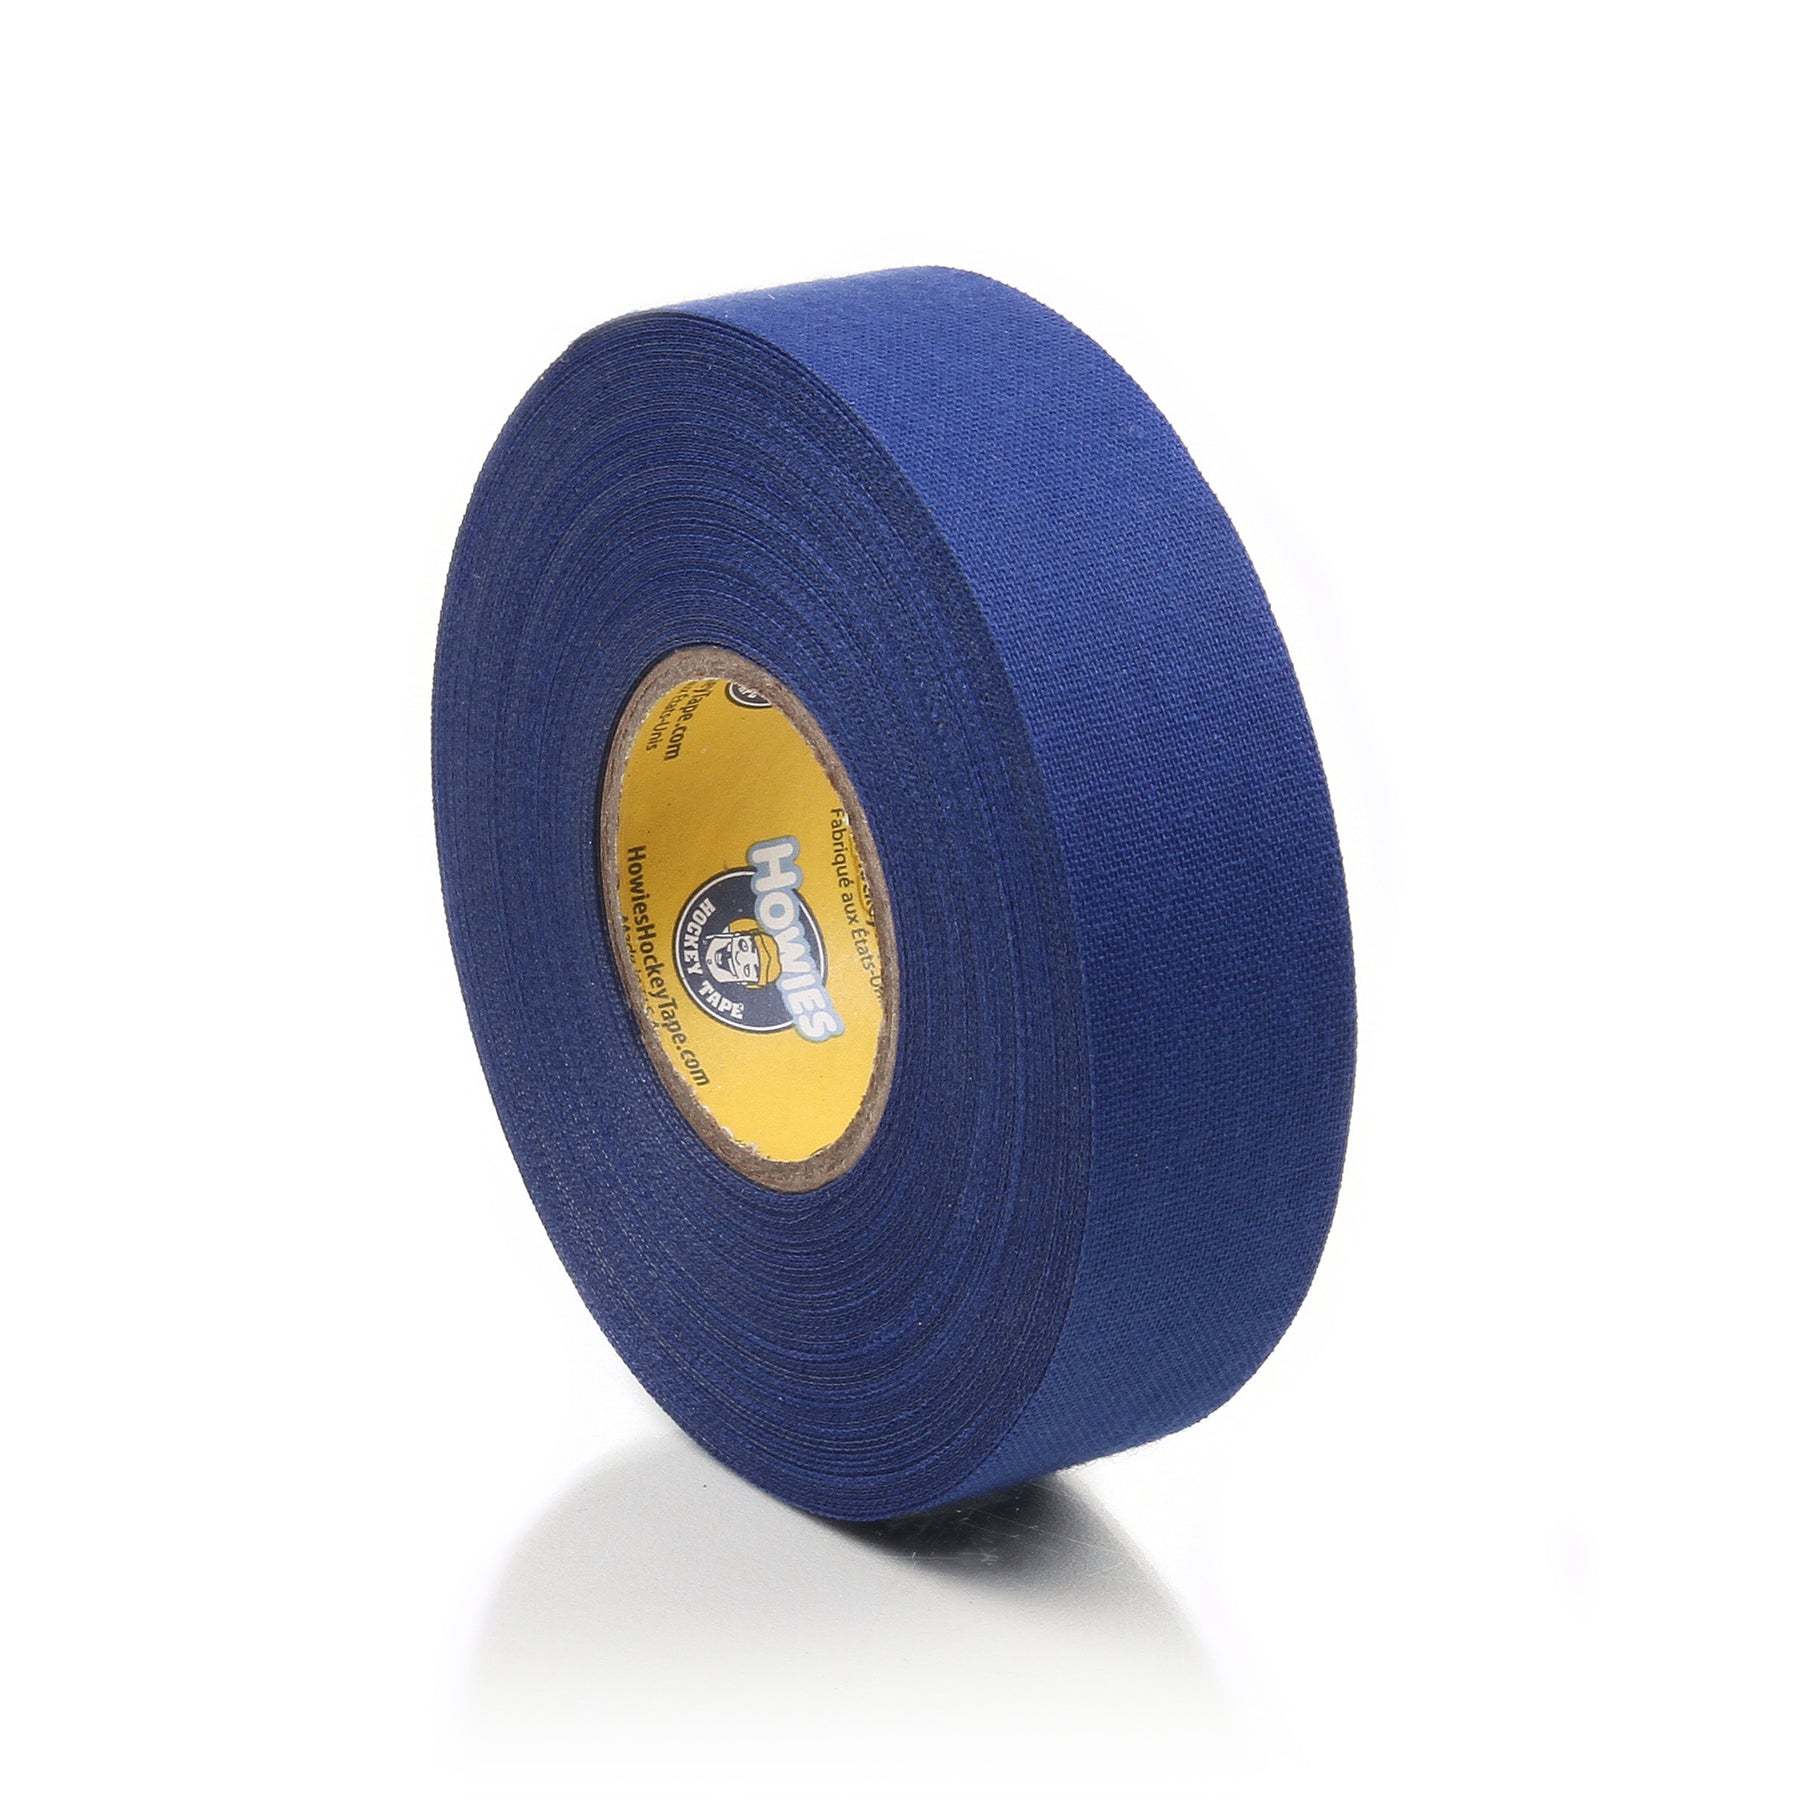 Stick Tape | Tape from Universal Lacrosse